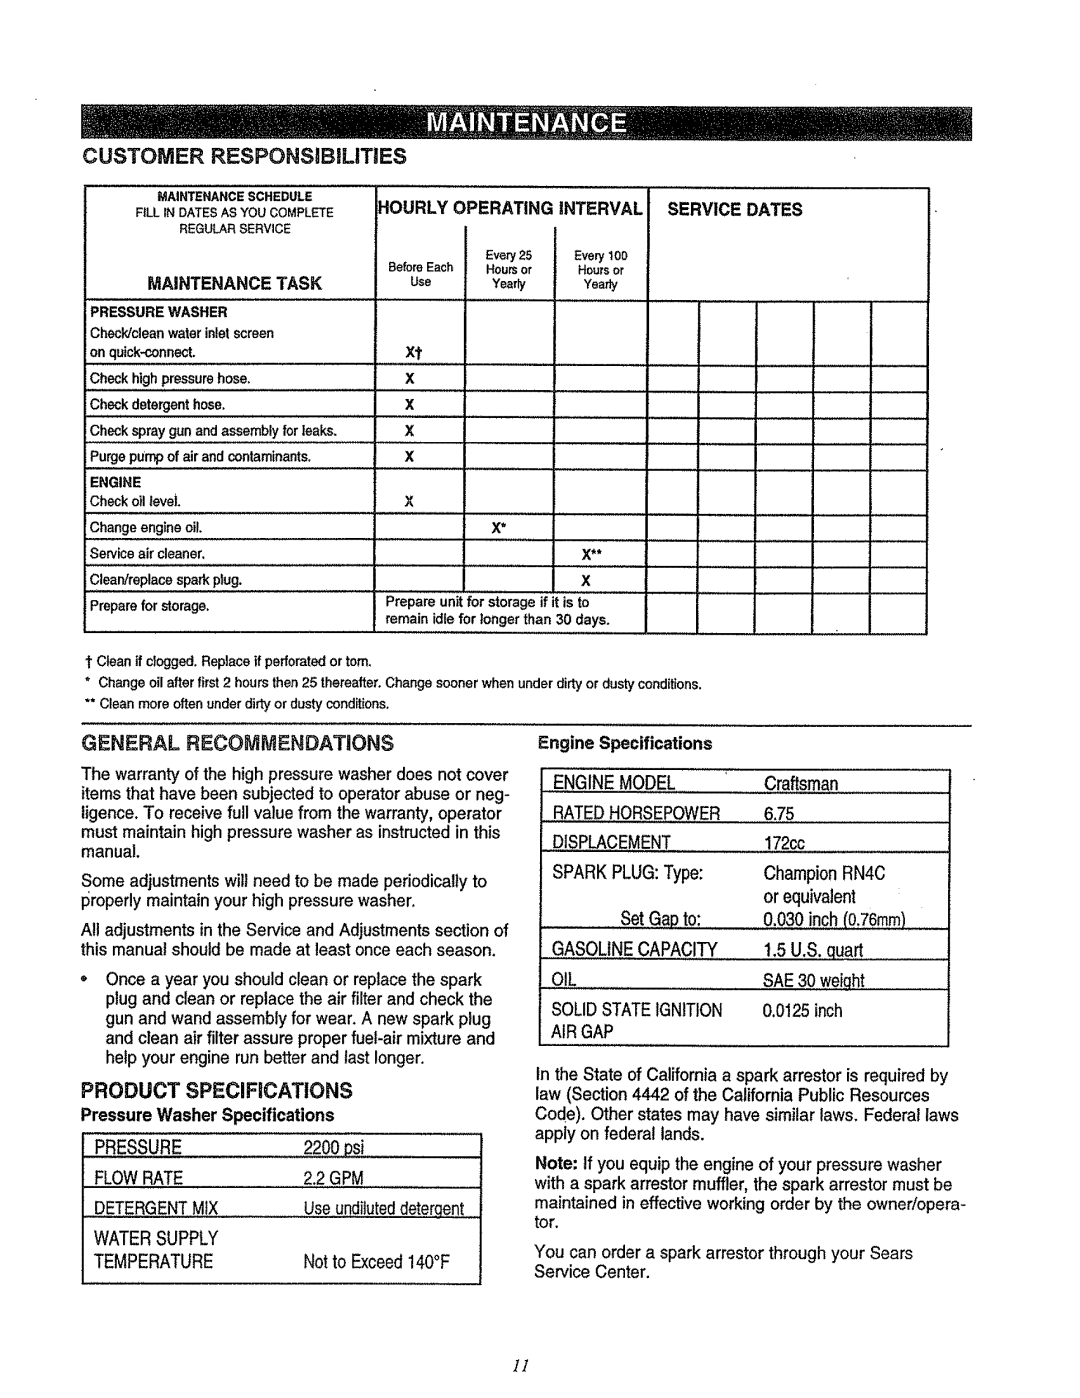 Craftsman 580.7622 manual CUSTOMER RESPONSiBiLITIES, Product Specifications 